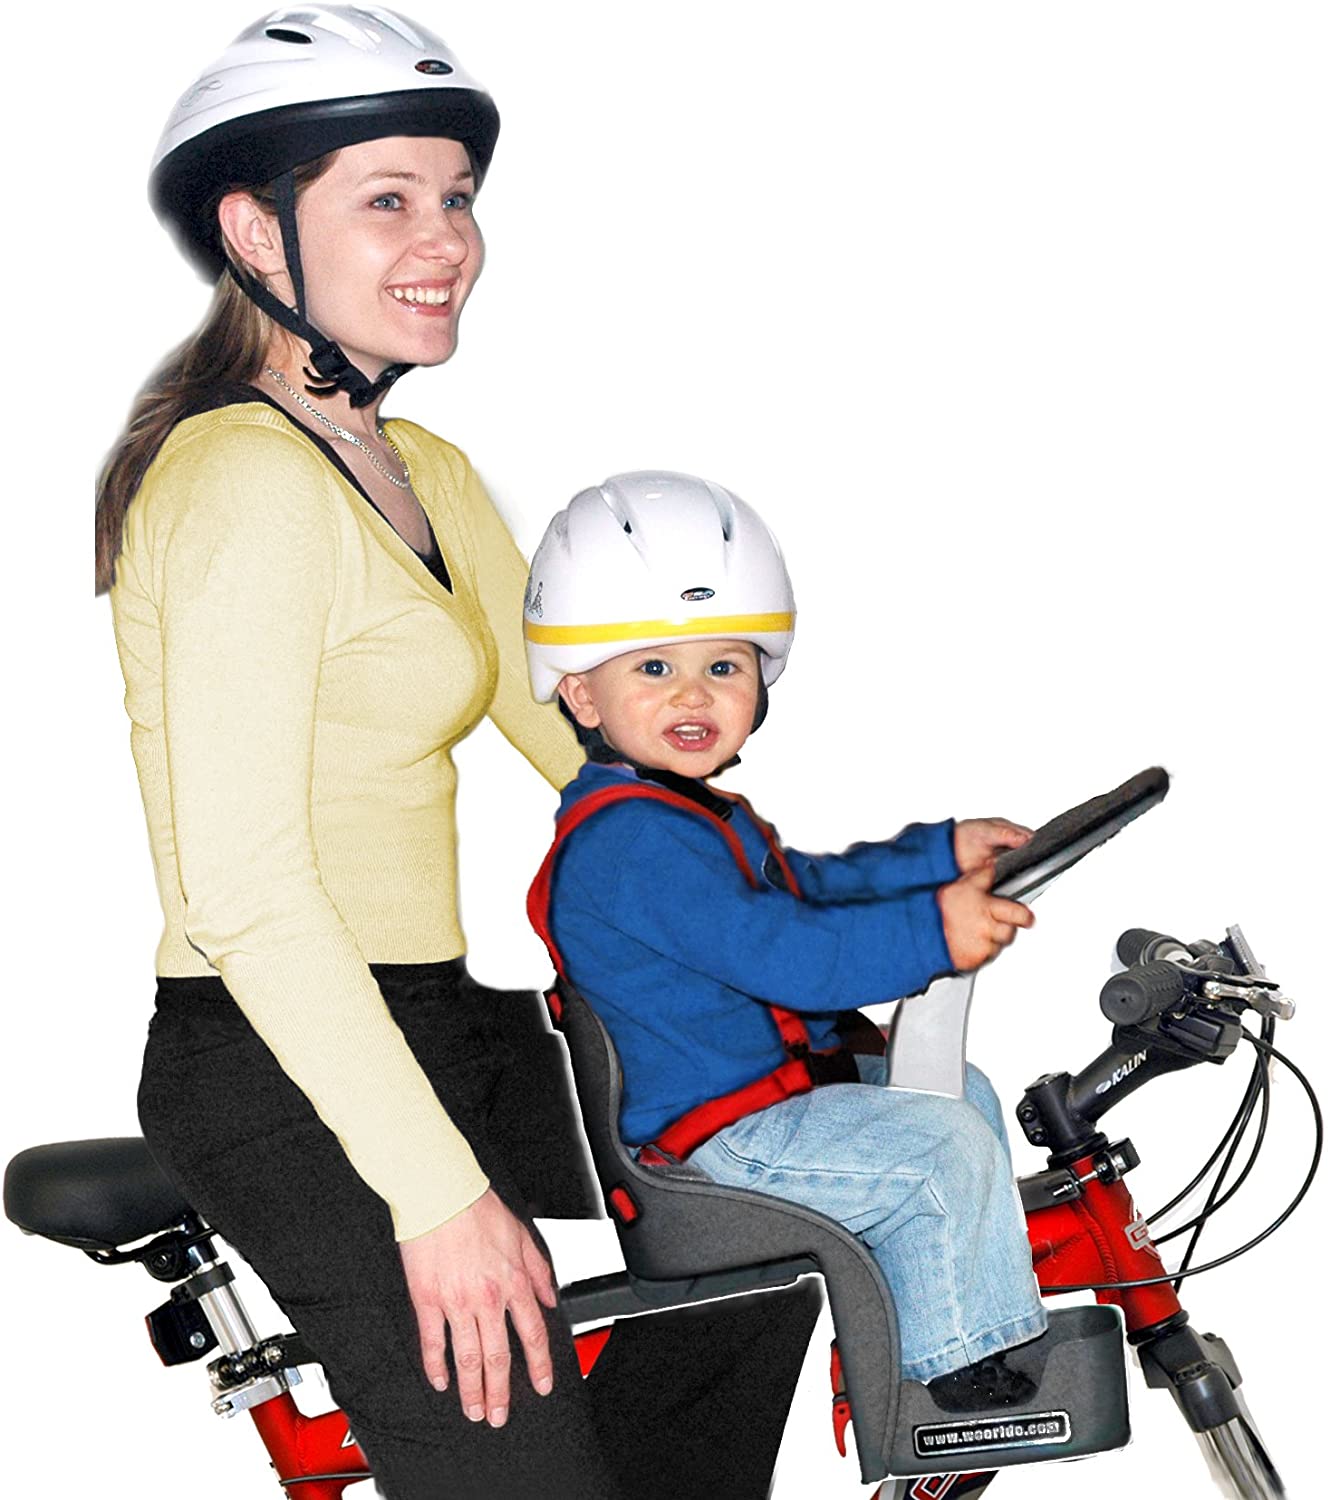 Best Baby Bike Seat Australia - Your Buying Guide